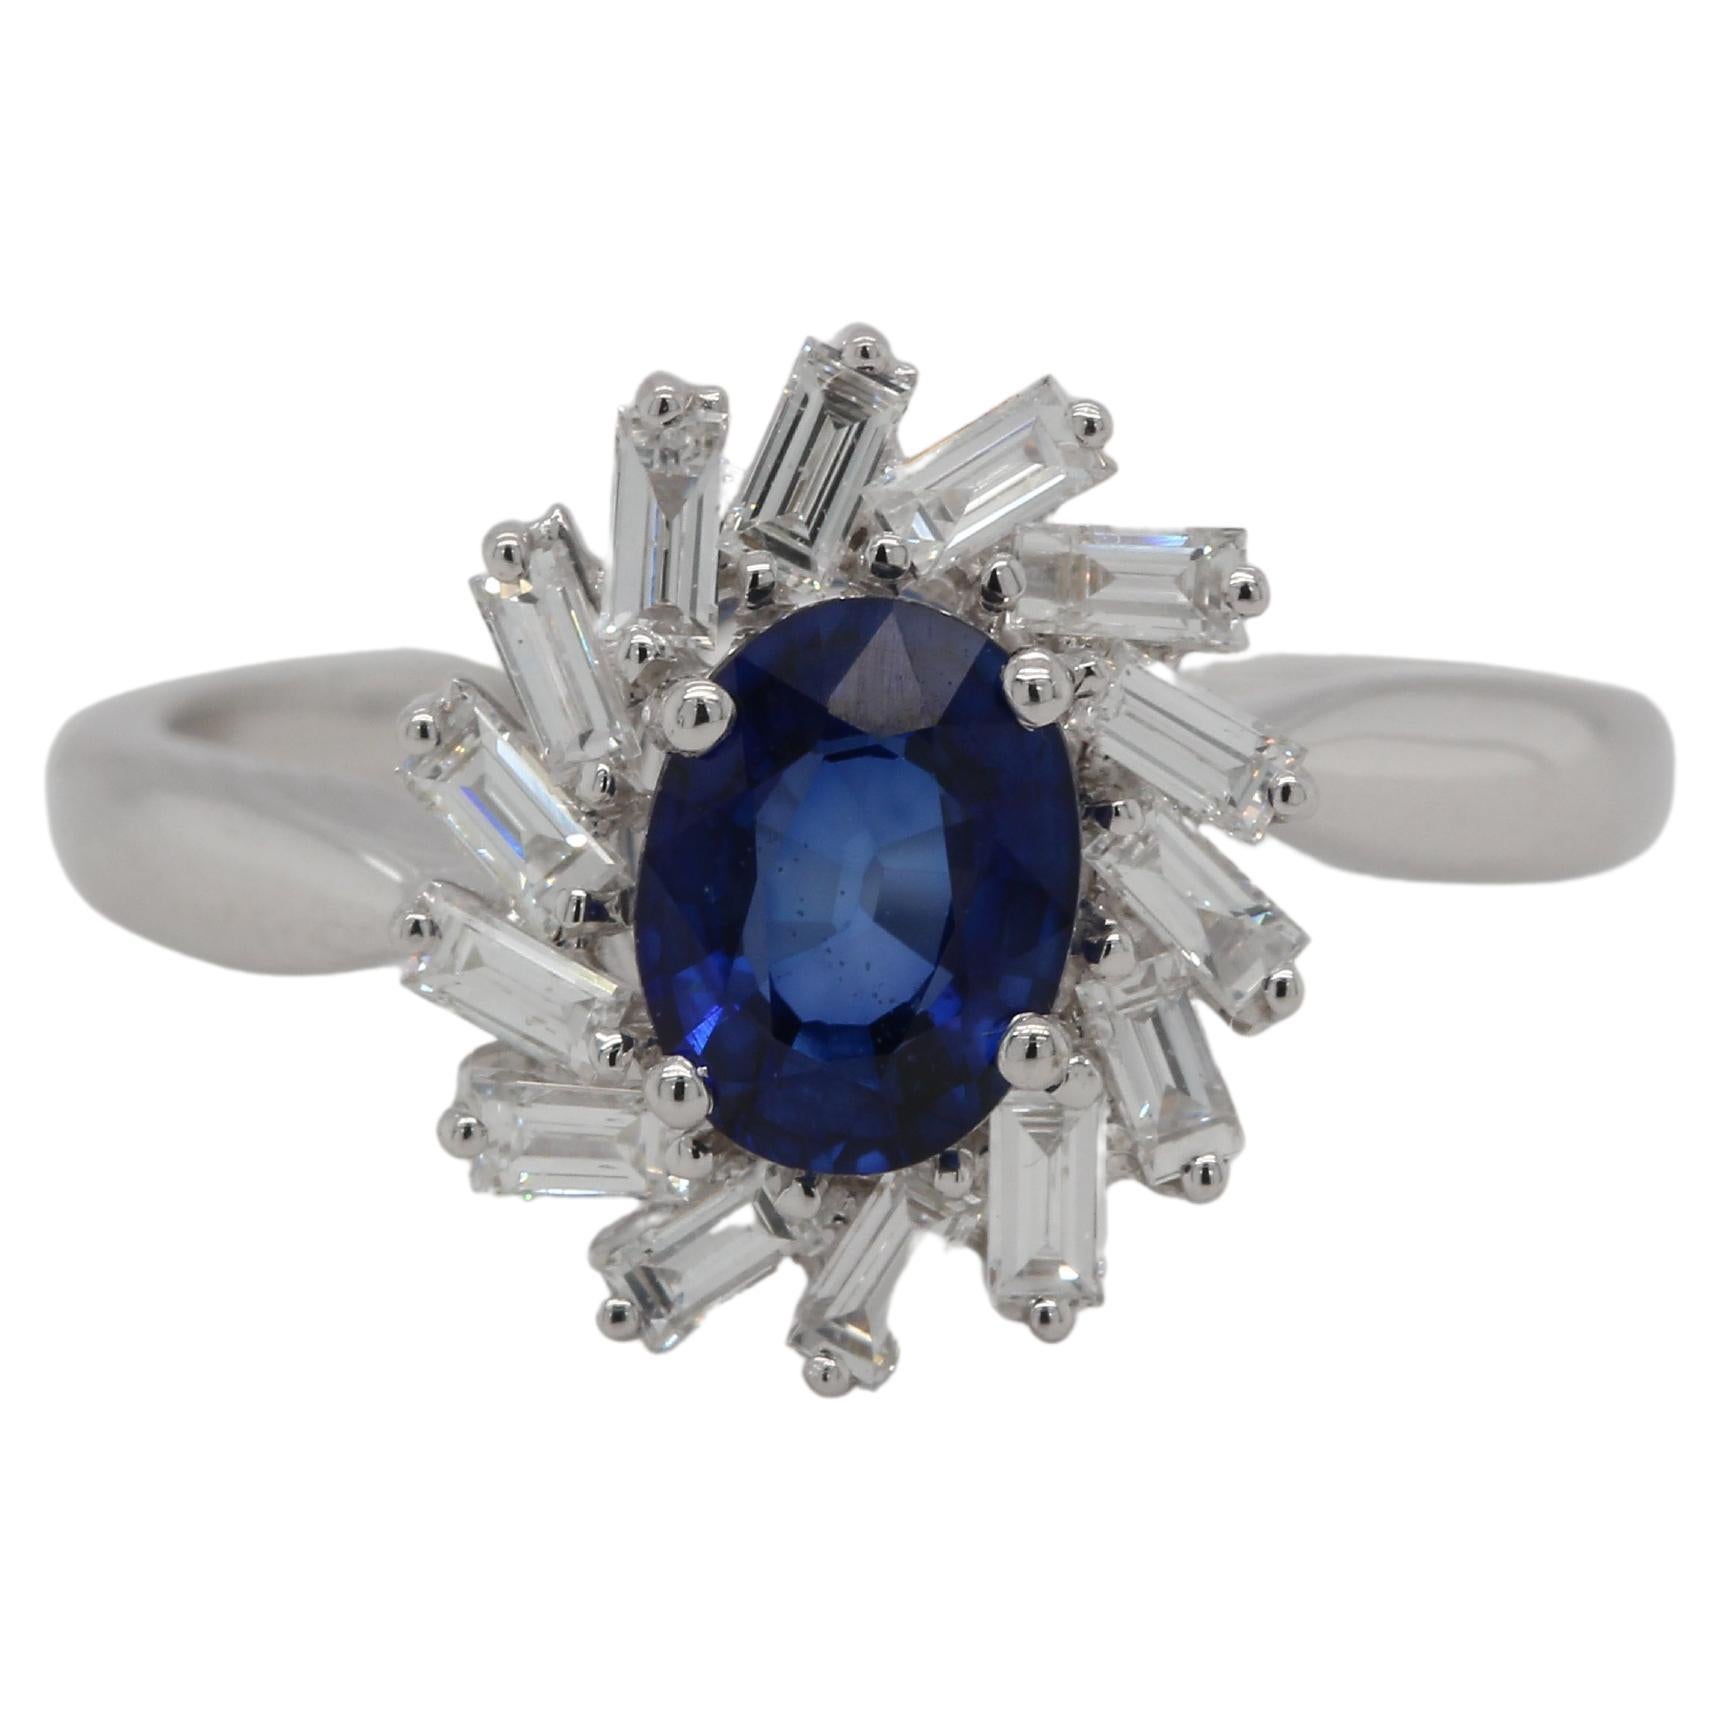  This ring is the perfect piece for someone who wants to make a statement. The diffusion blue sapphire stone stands out with its color, as do the diamond stones that surround it. The antique style setting on this ring makes it look absolutely